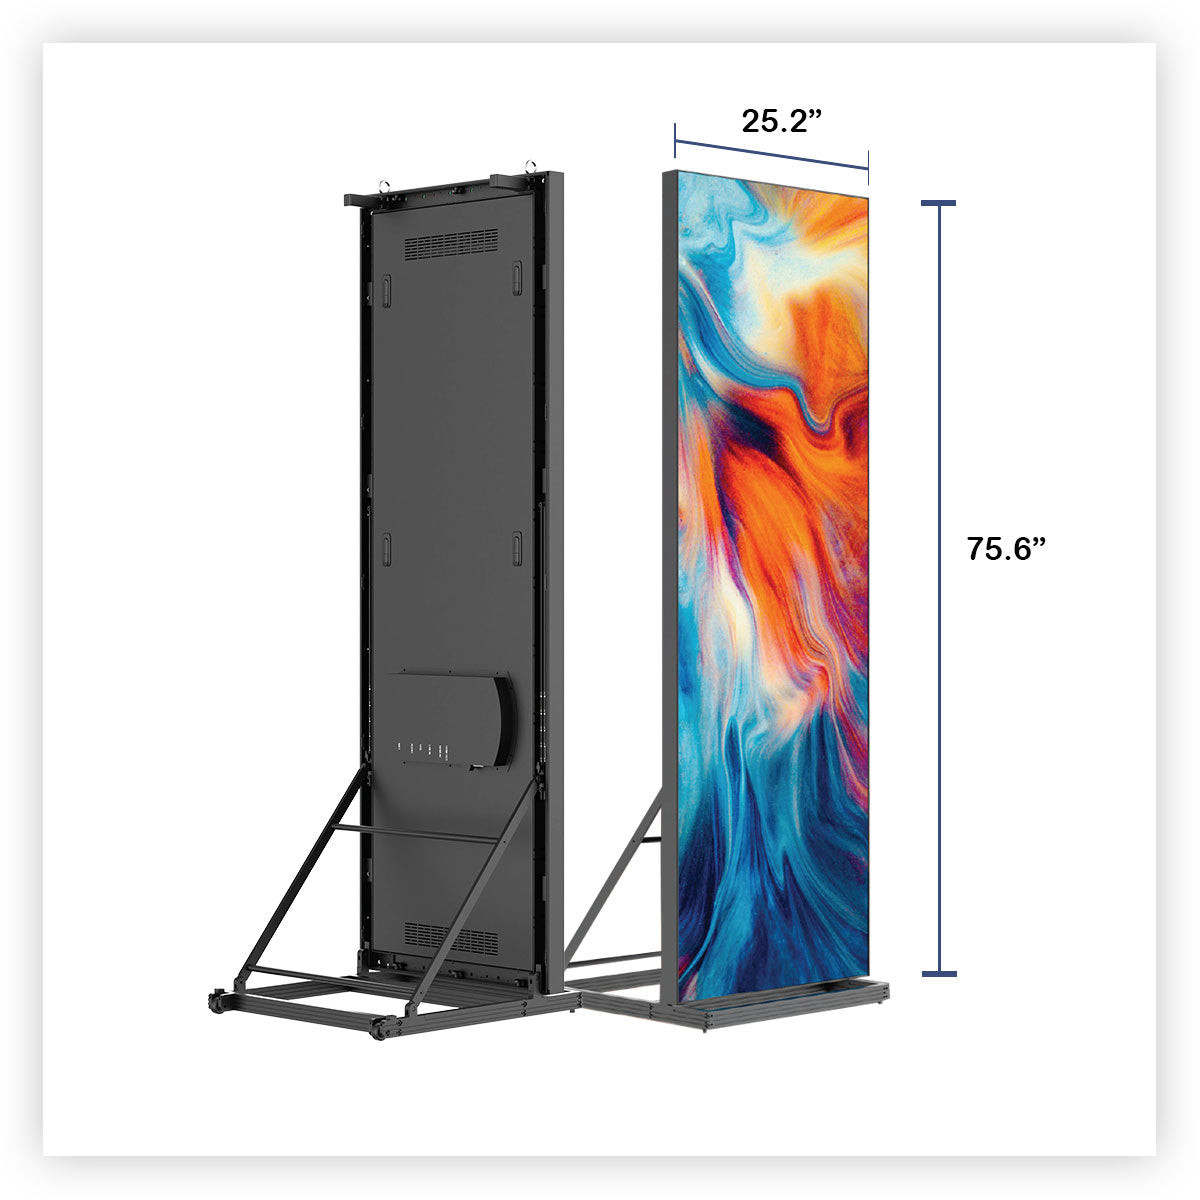 AdSpire Indoor LED Poster 25.2"x75.6" P2.5mm